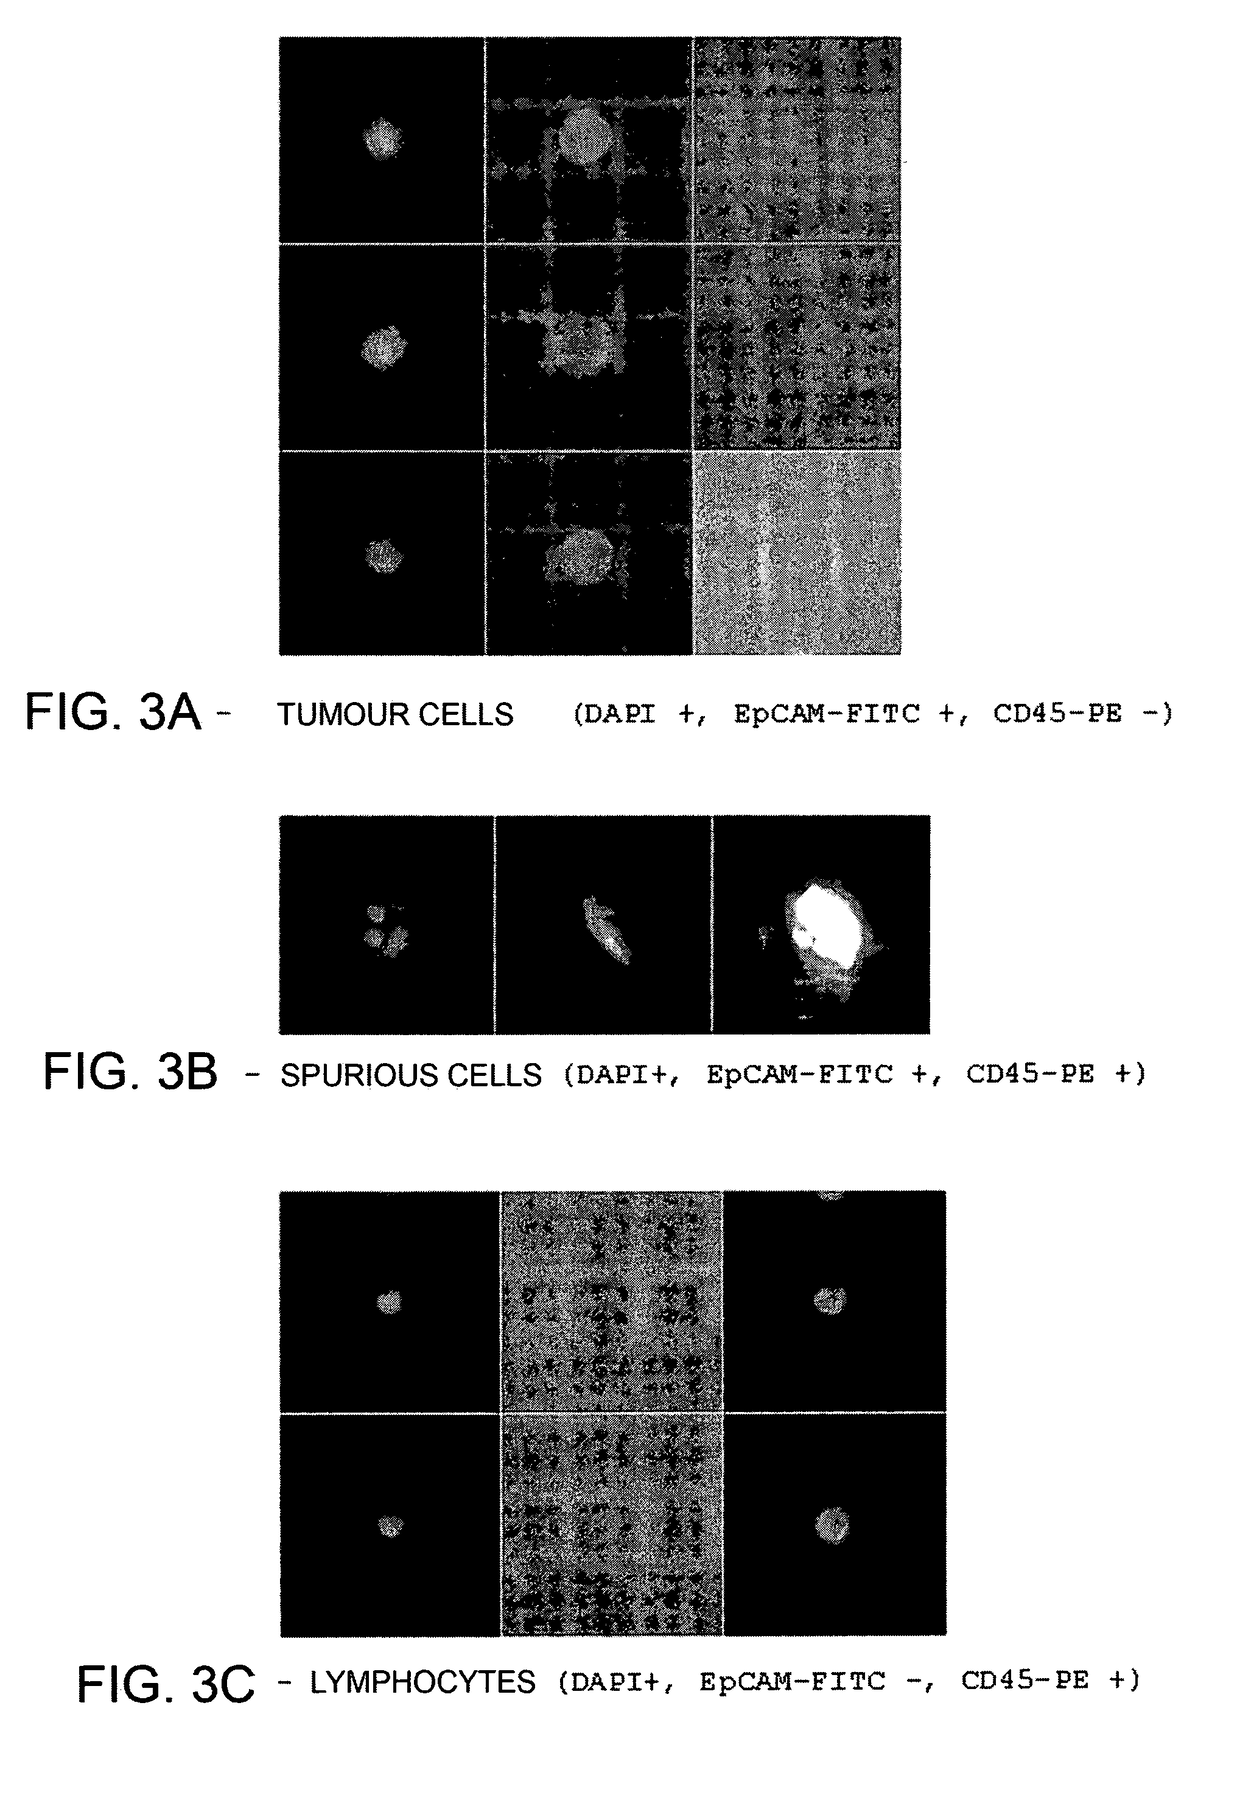 Method for identification, selection and analysis of tumour cells